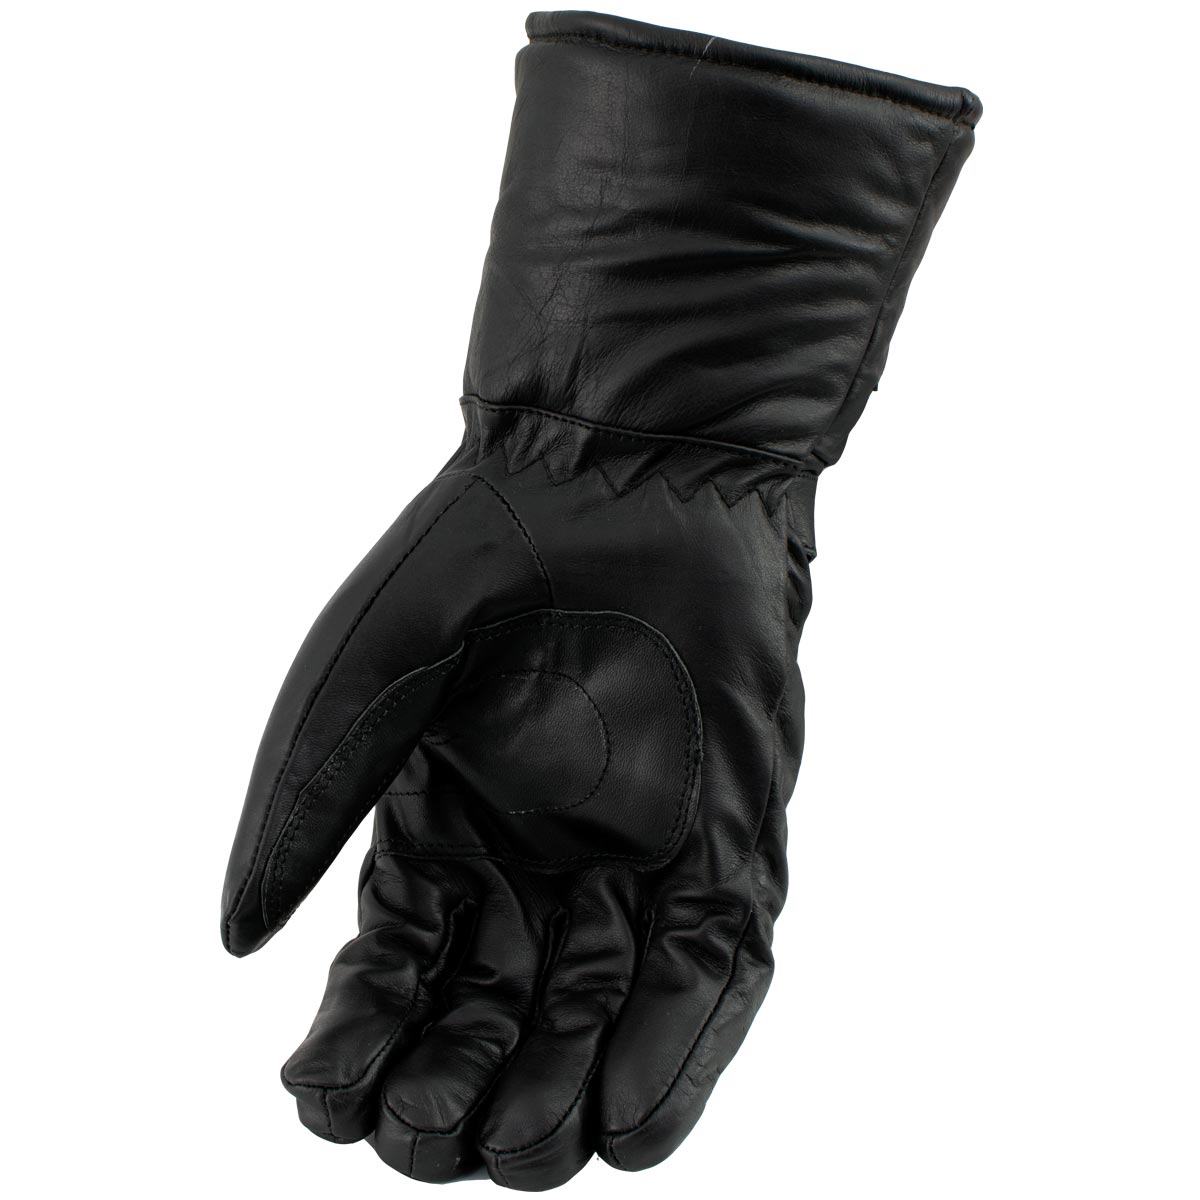 Men’s XS2066 Black Gauntlet Leather Motorcycle Winter Gloves with Rain Cover